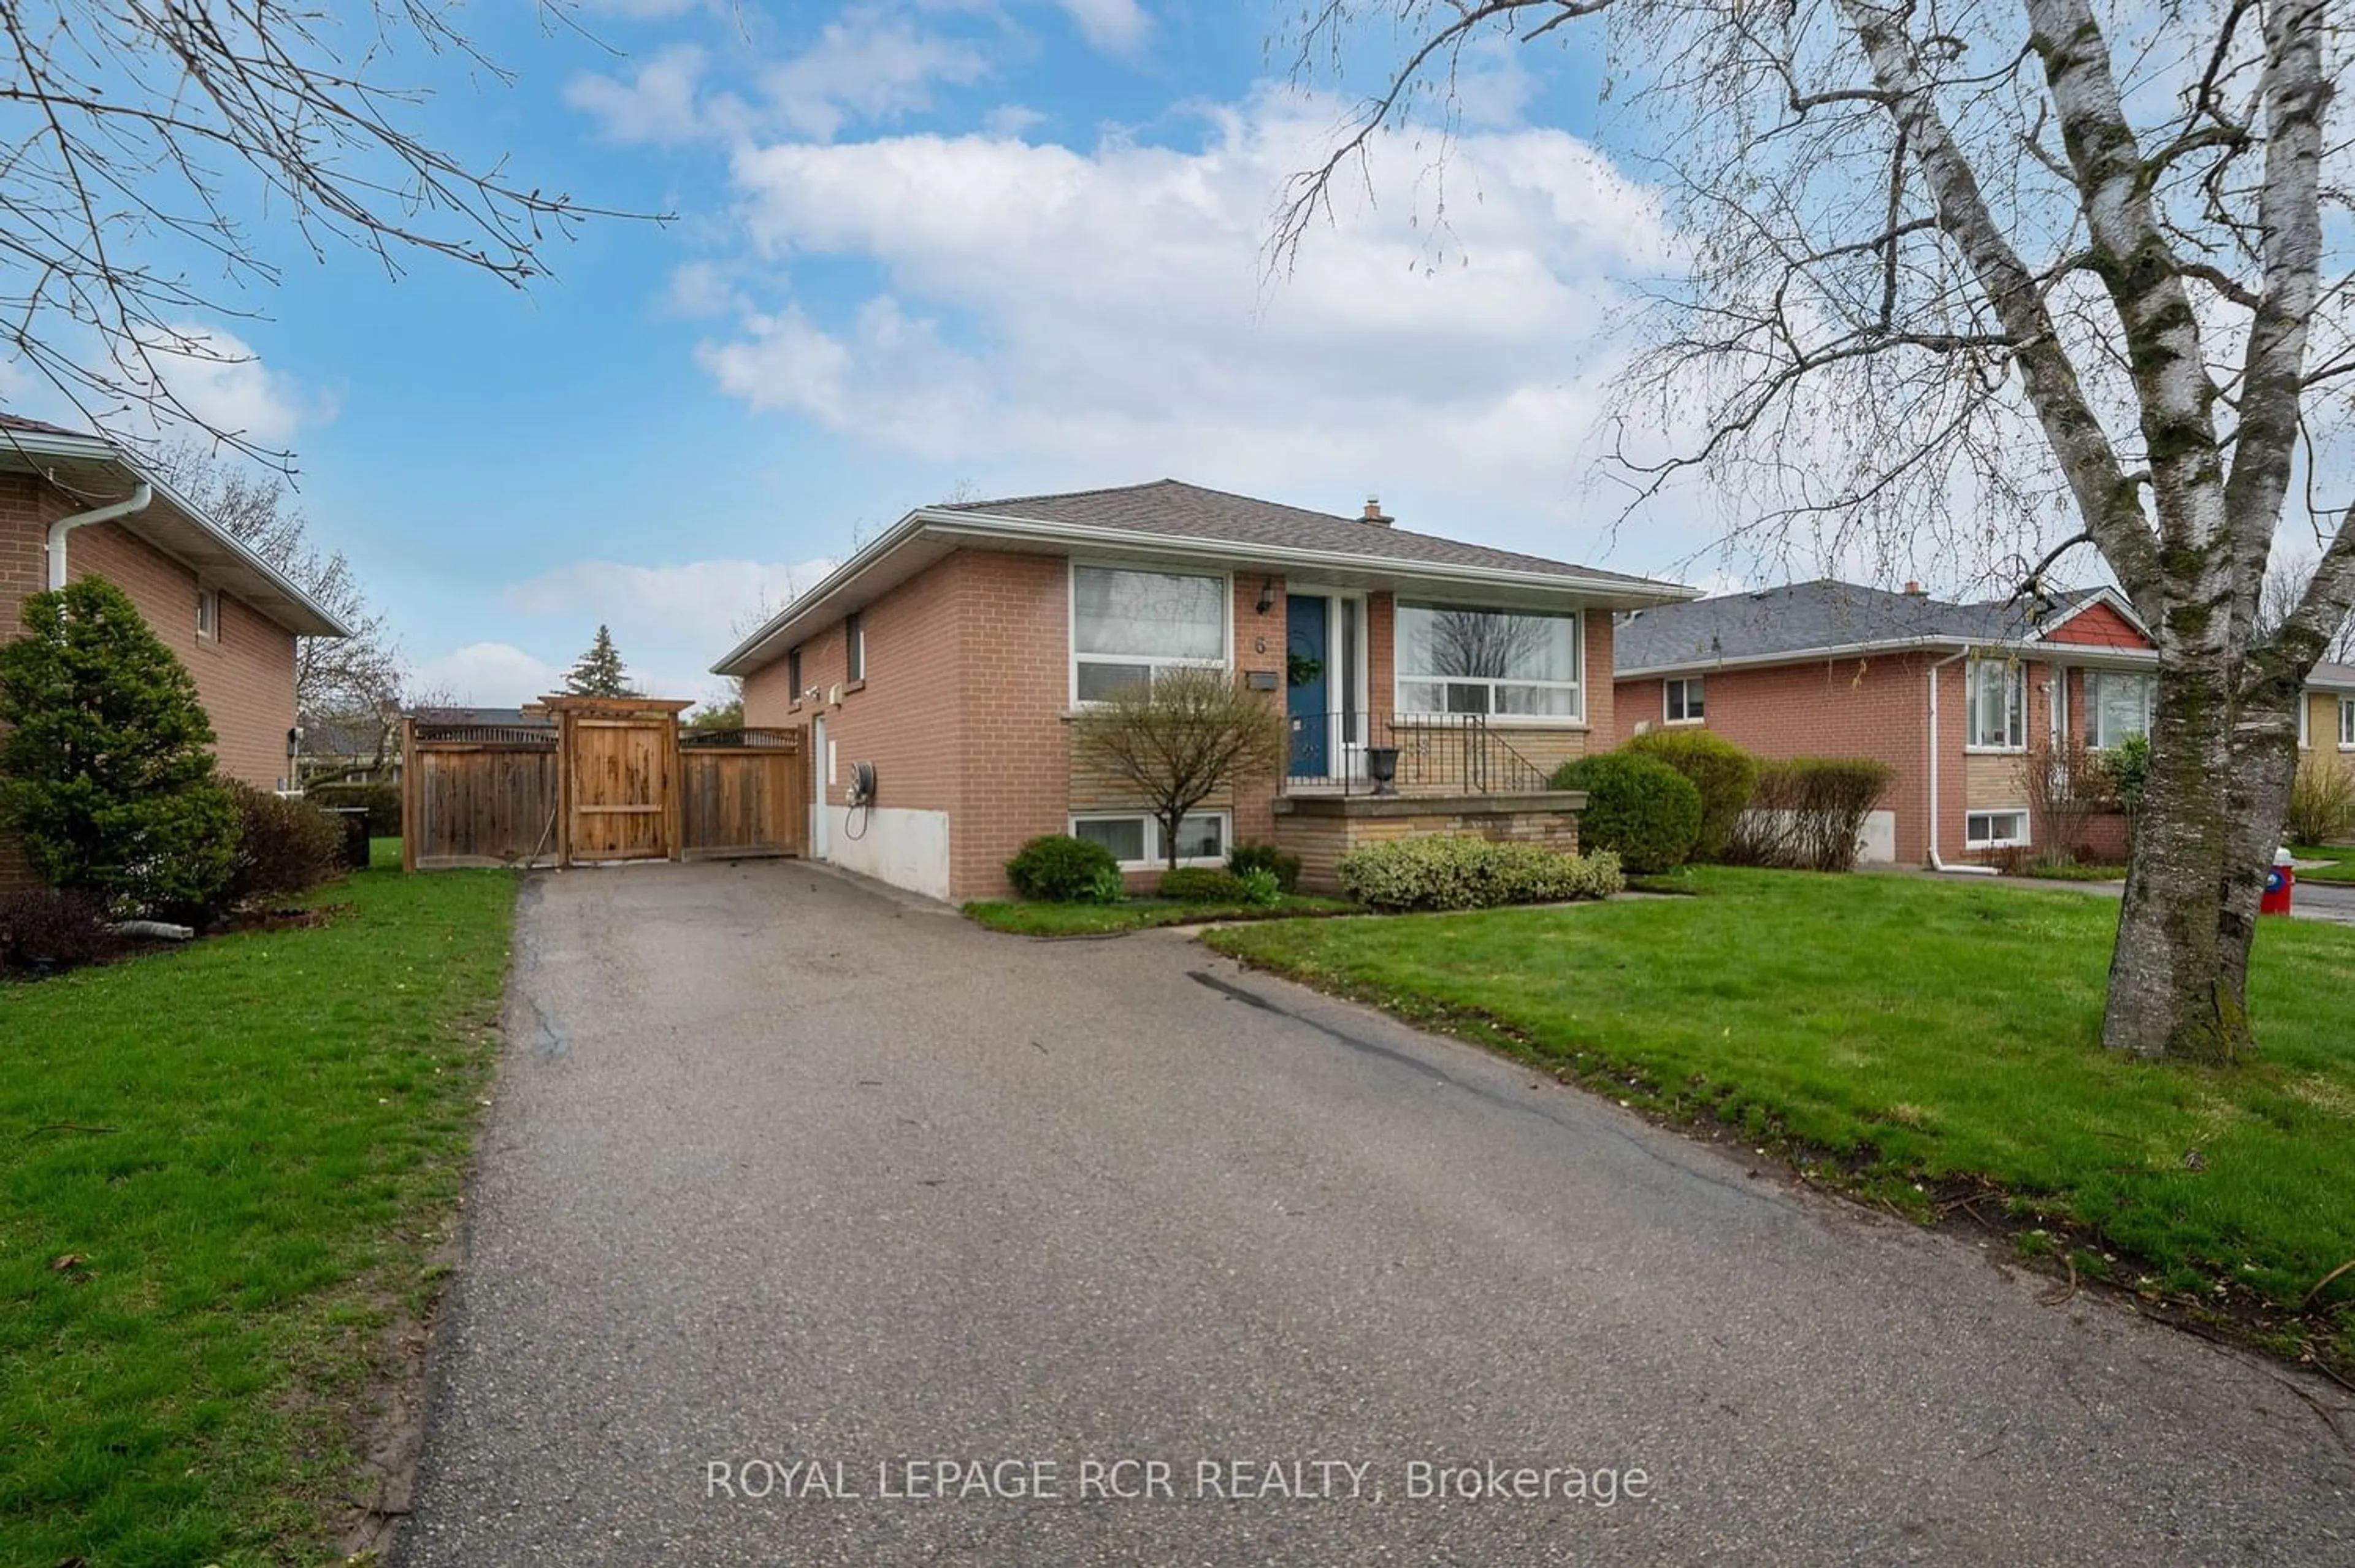 Frontside or backside of a home for 6 Ridgetop Ave, Brampton Ontario L6X 1Z7